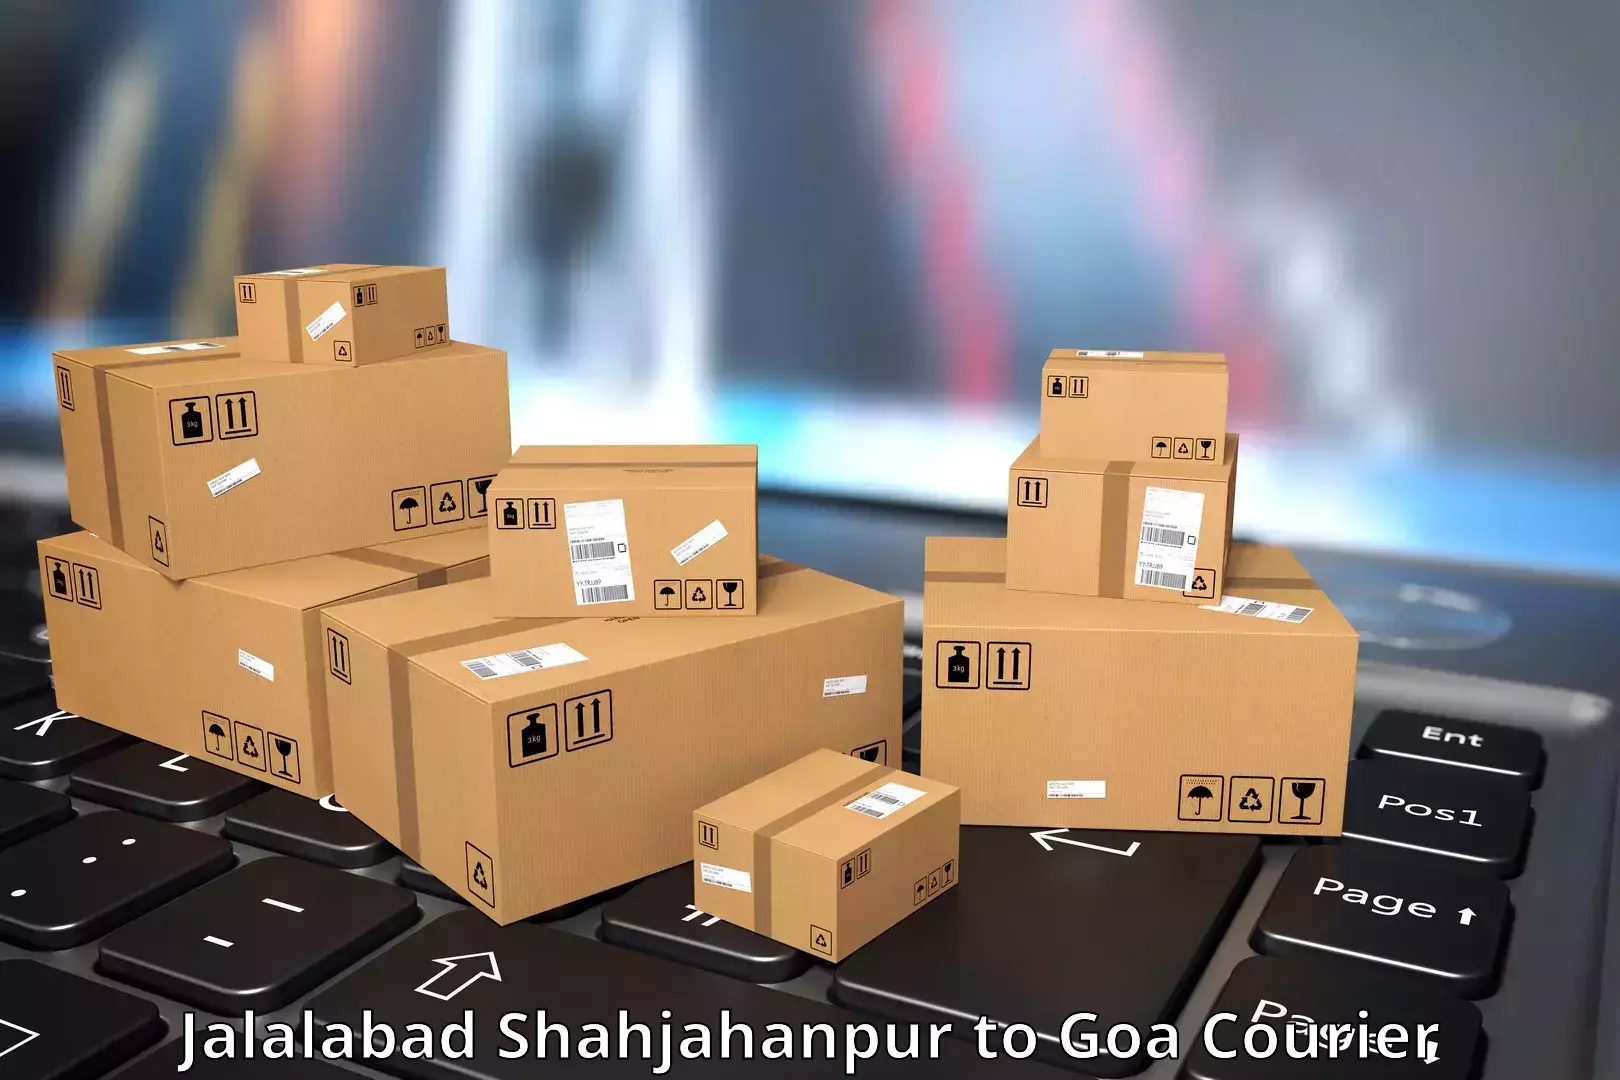 State-of-the-art courier technology Jalalabad Shahjahanpur to IIT Goa